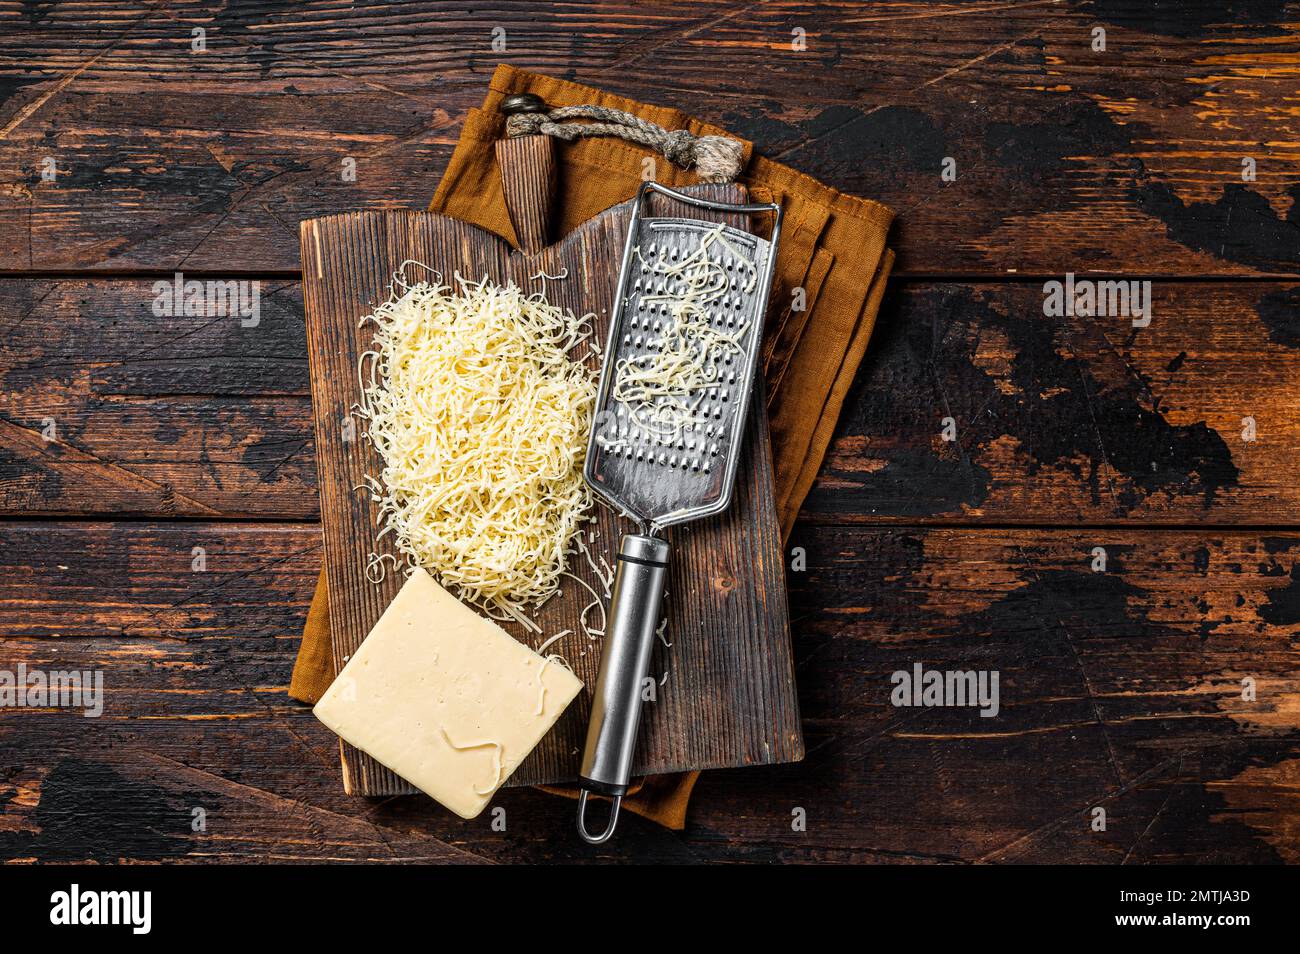 https://c8.alamy.com/comp/2MTJA3D/piece-of-semi-hard-cheese-and-grated-cheese-with-grater-wooden-background-top-view-2MTJA3D.jpg